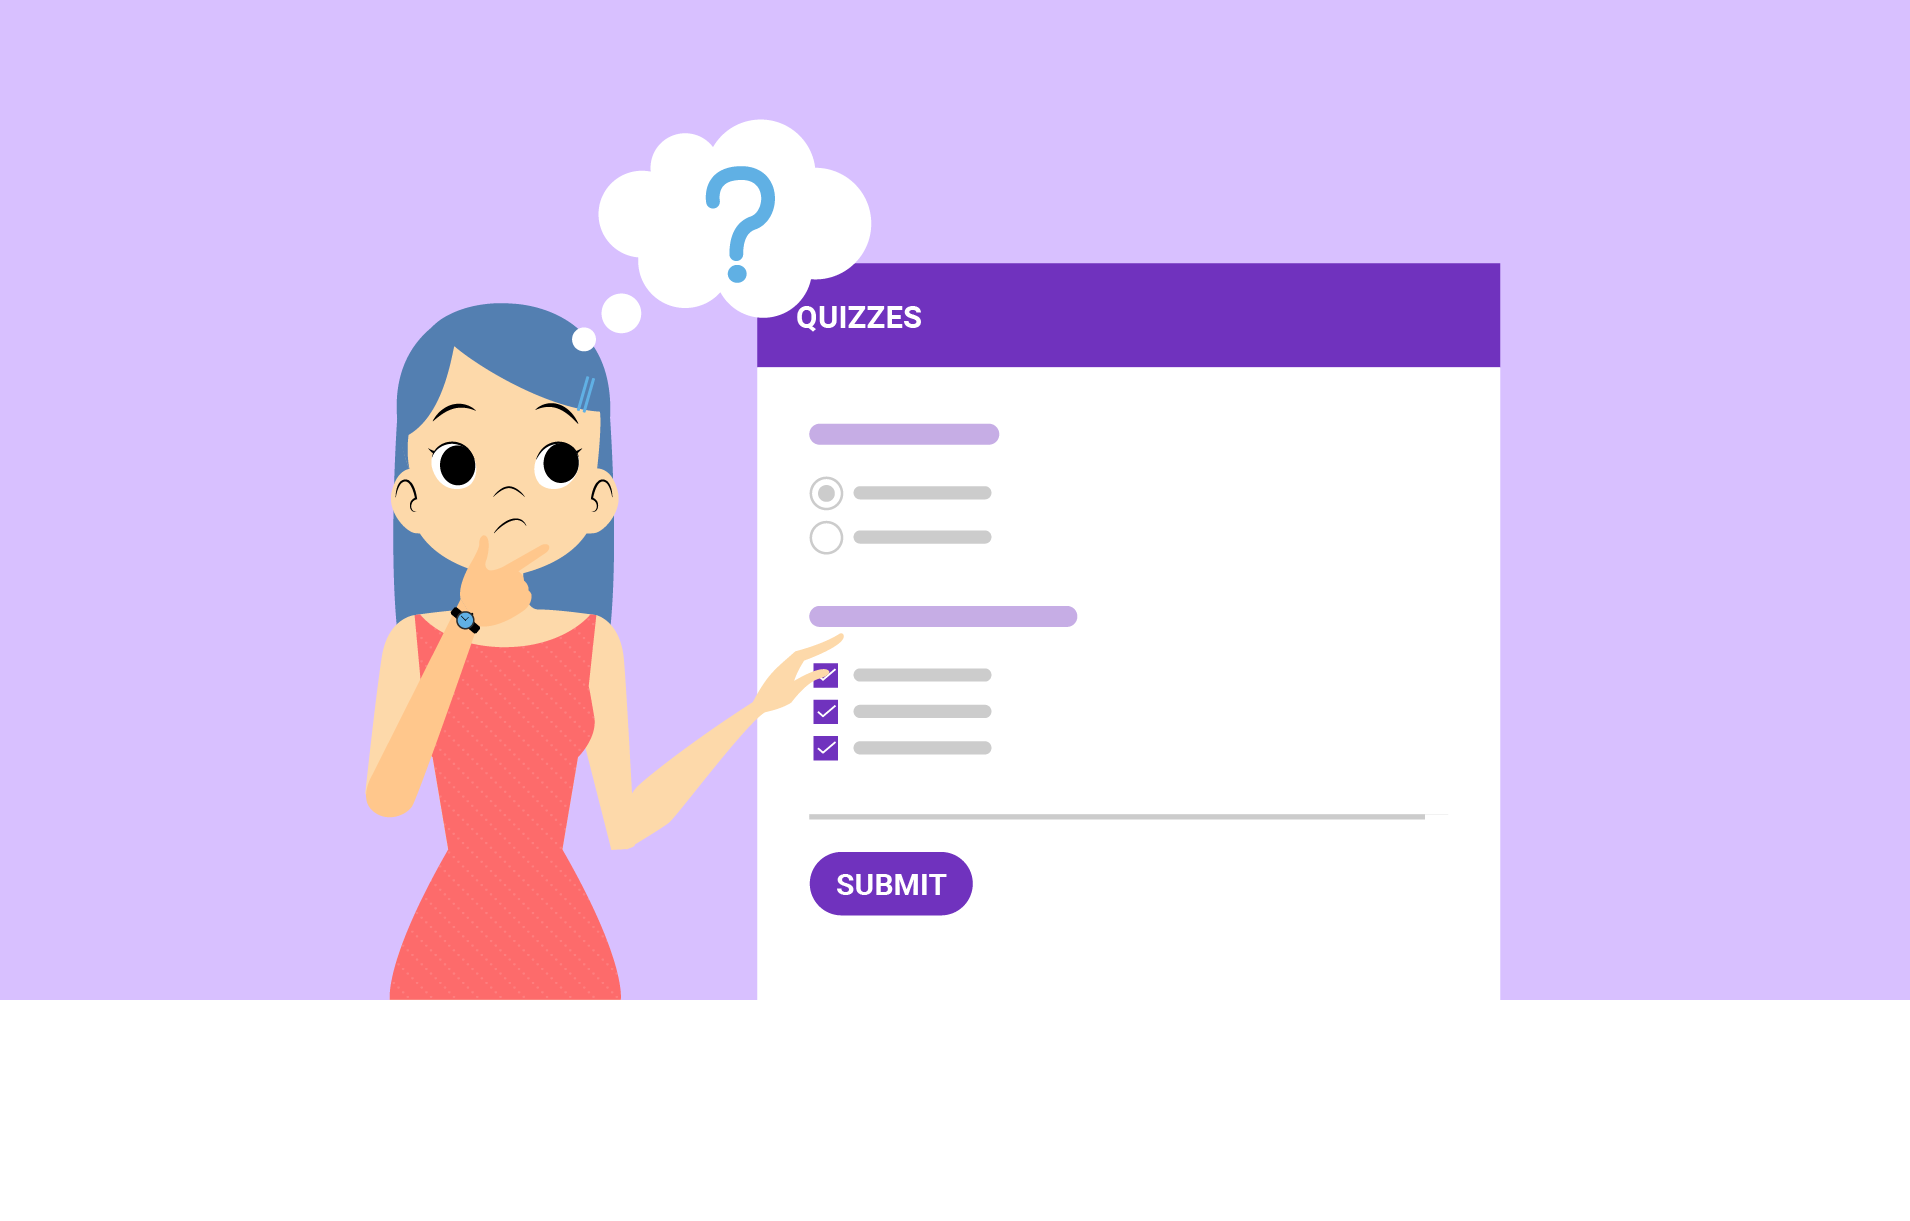 Contact forms can help you create exciting WordPress quiz